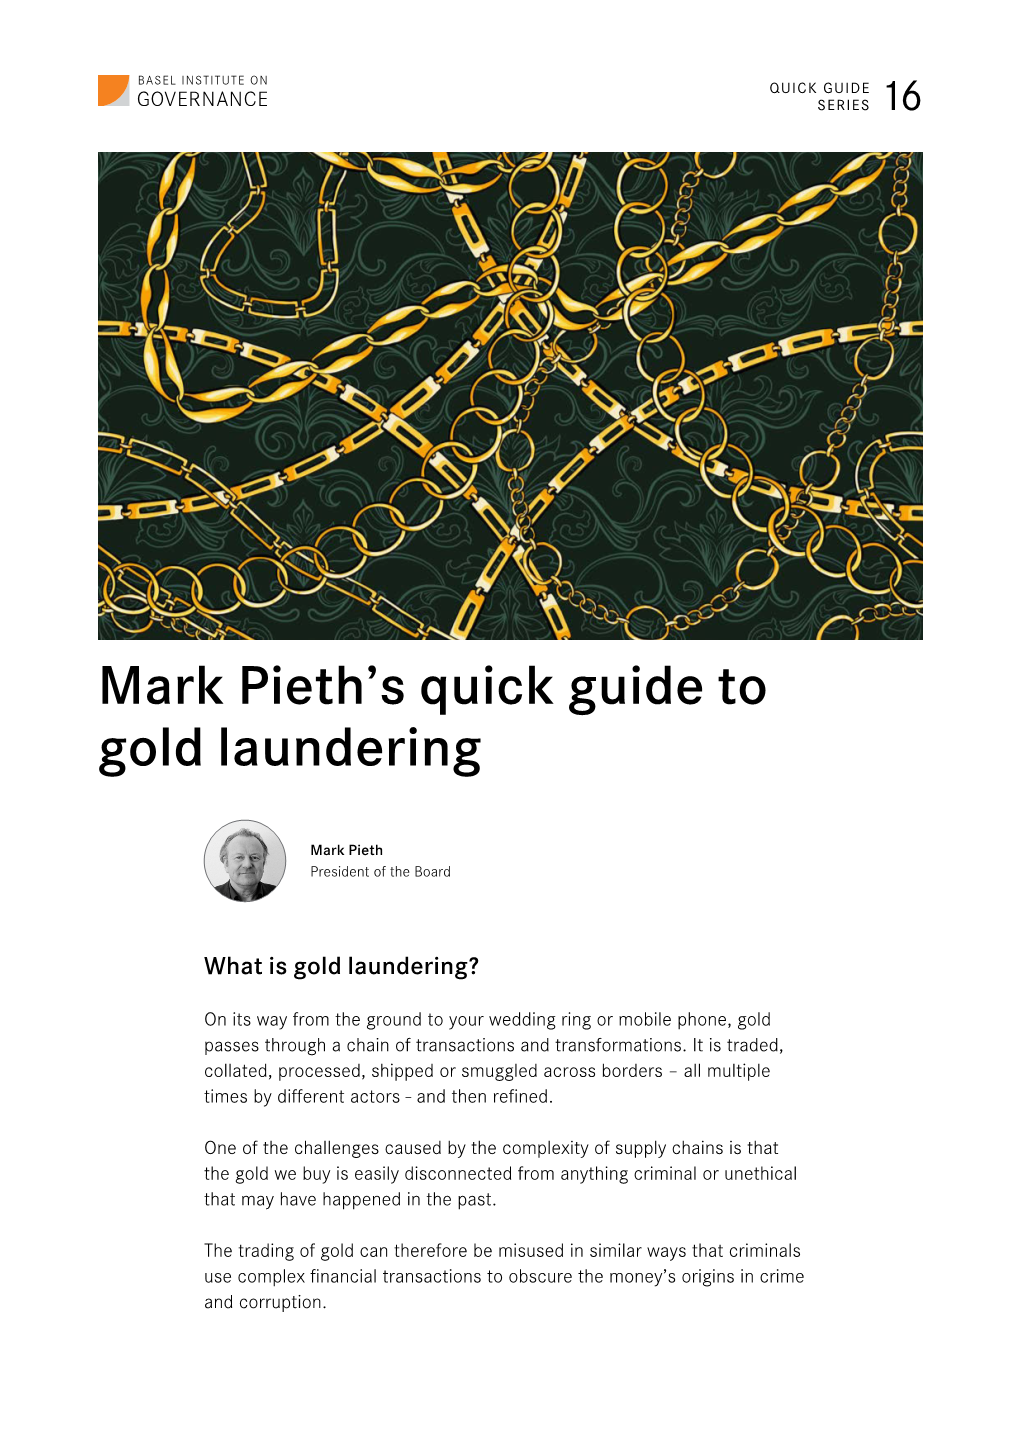 Mark Pieth's Quick Guide to Gold Laundering